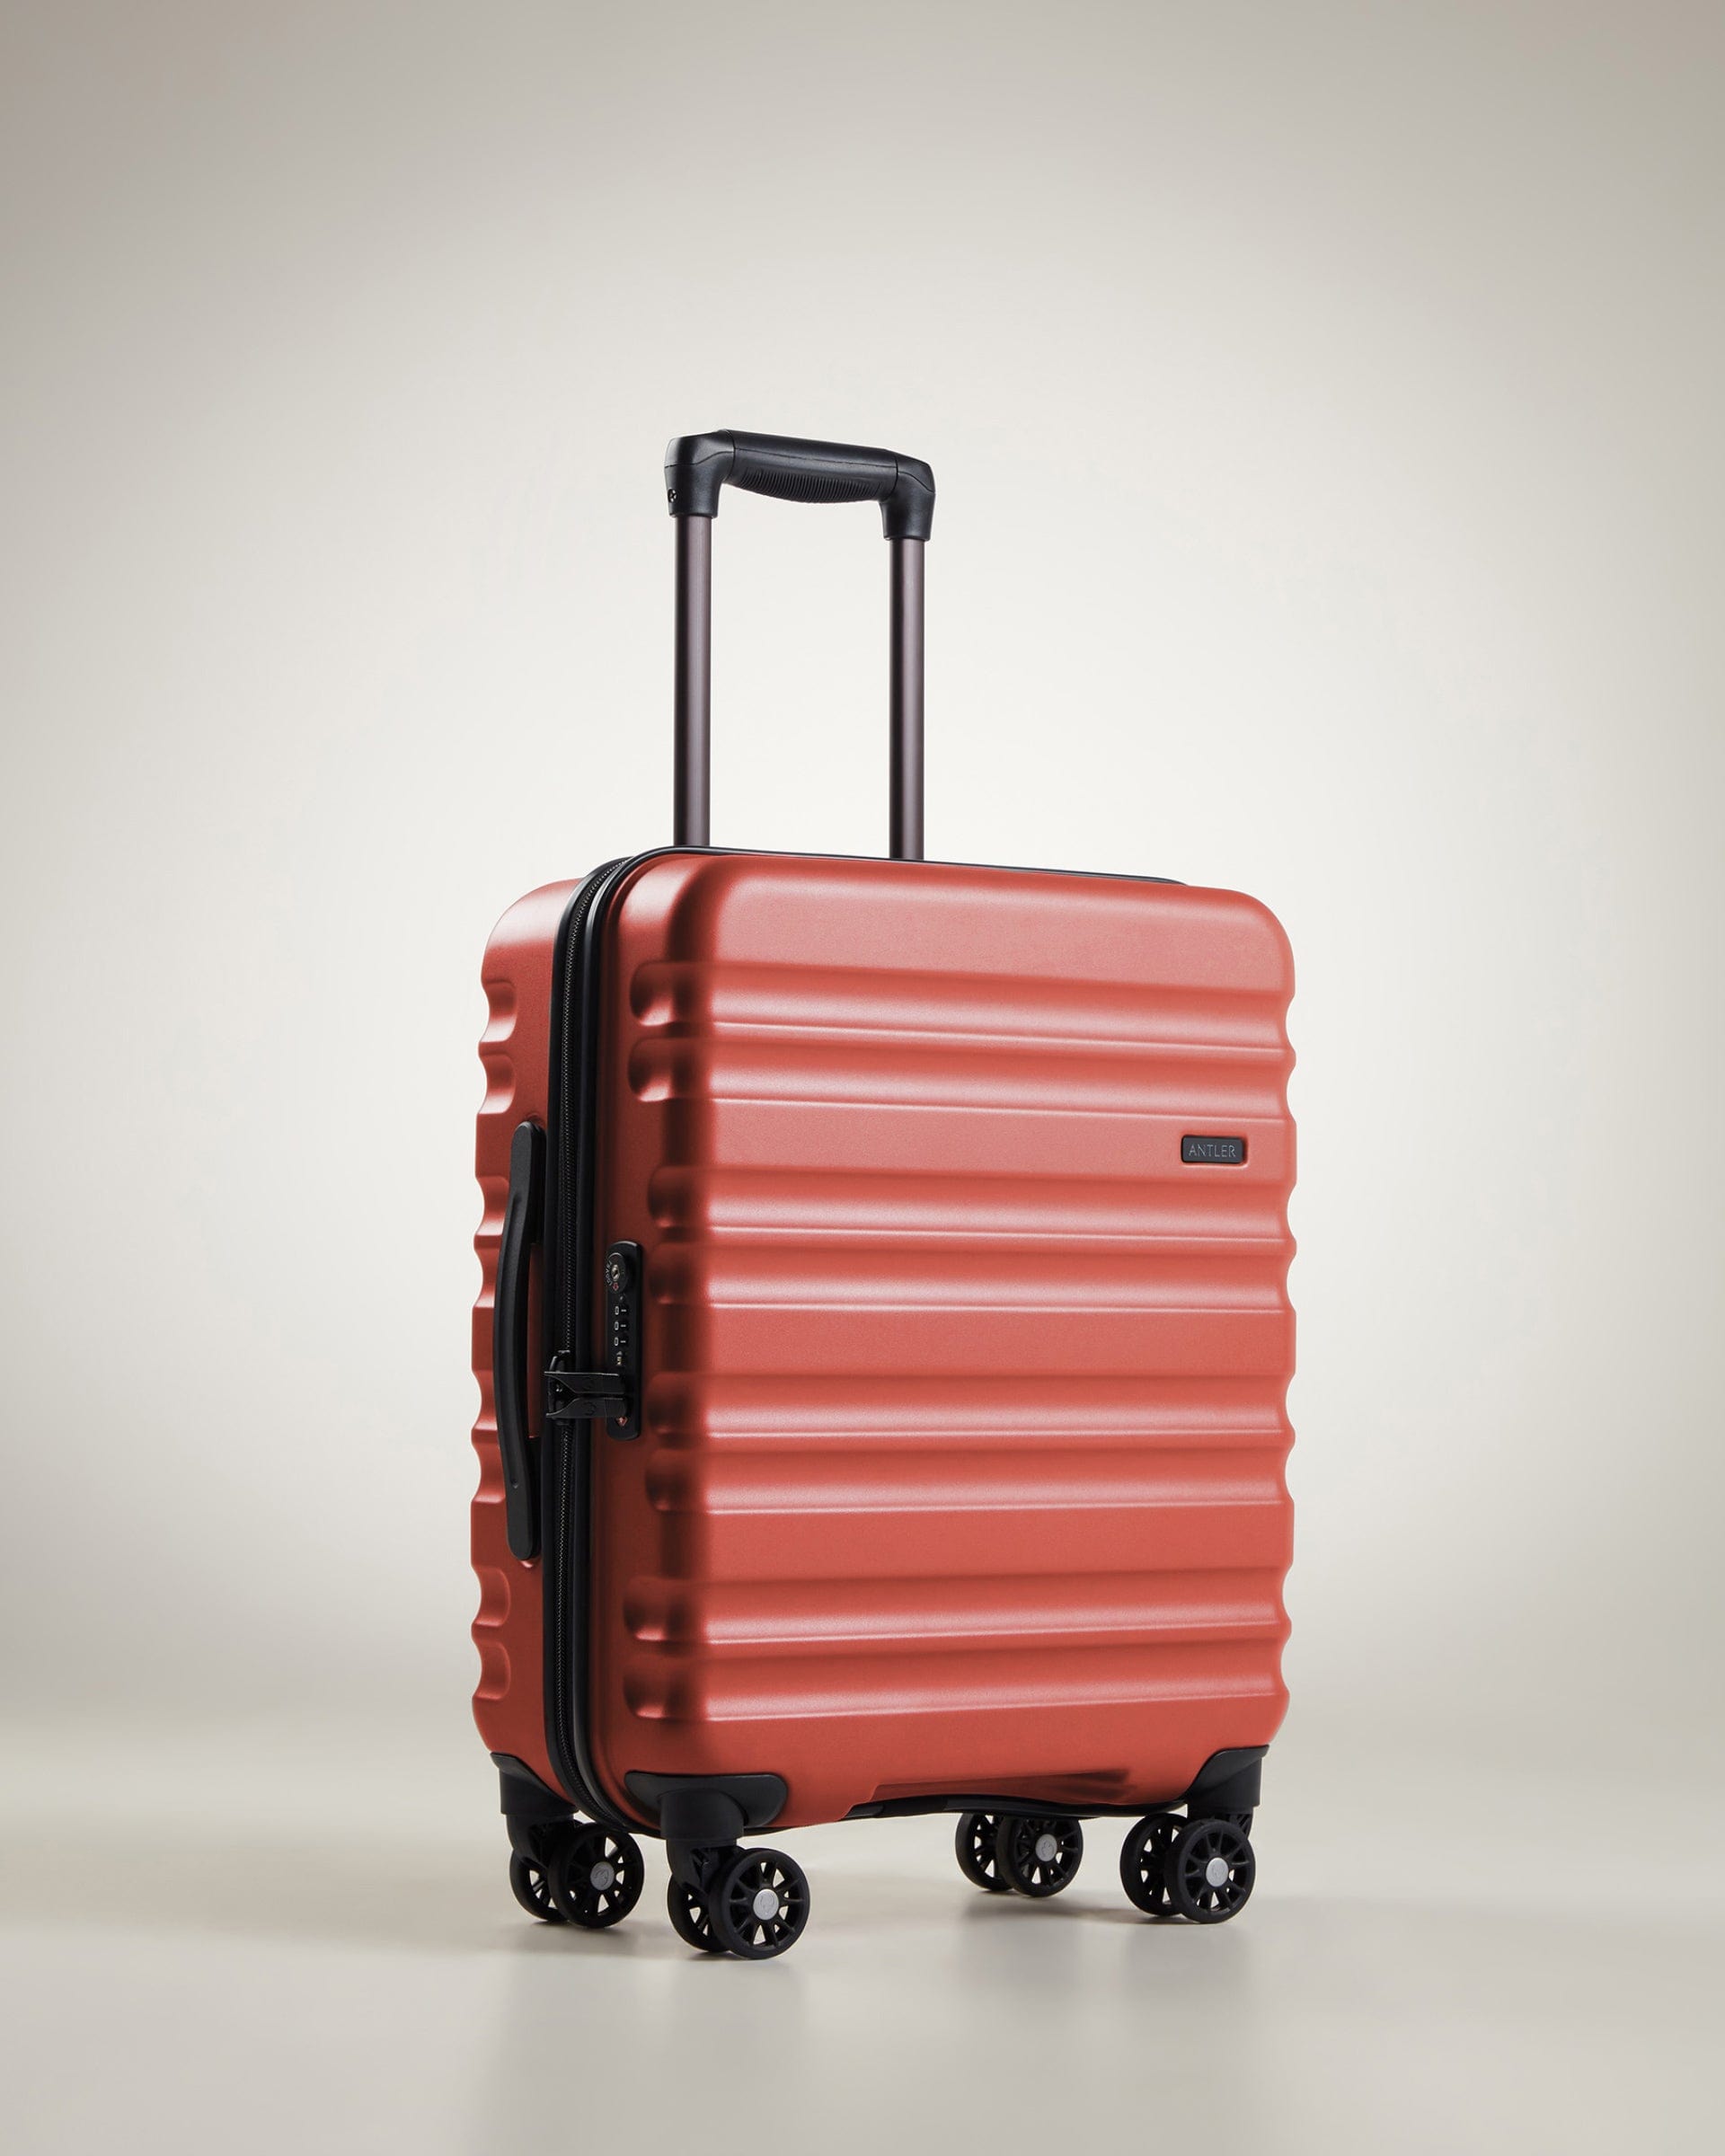 View Antler Clifton Cabin Suitcase In Poppy Size 20 x 40 x 55 cm information